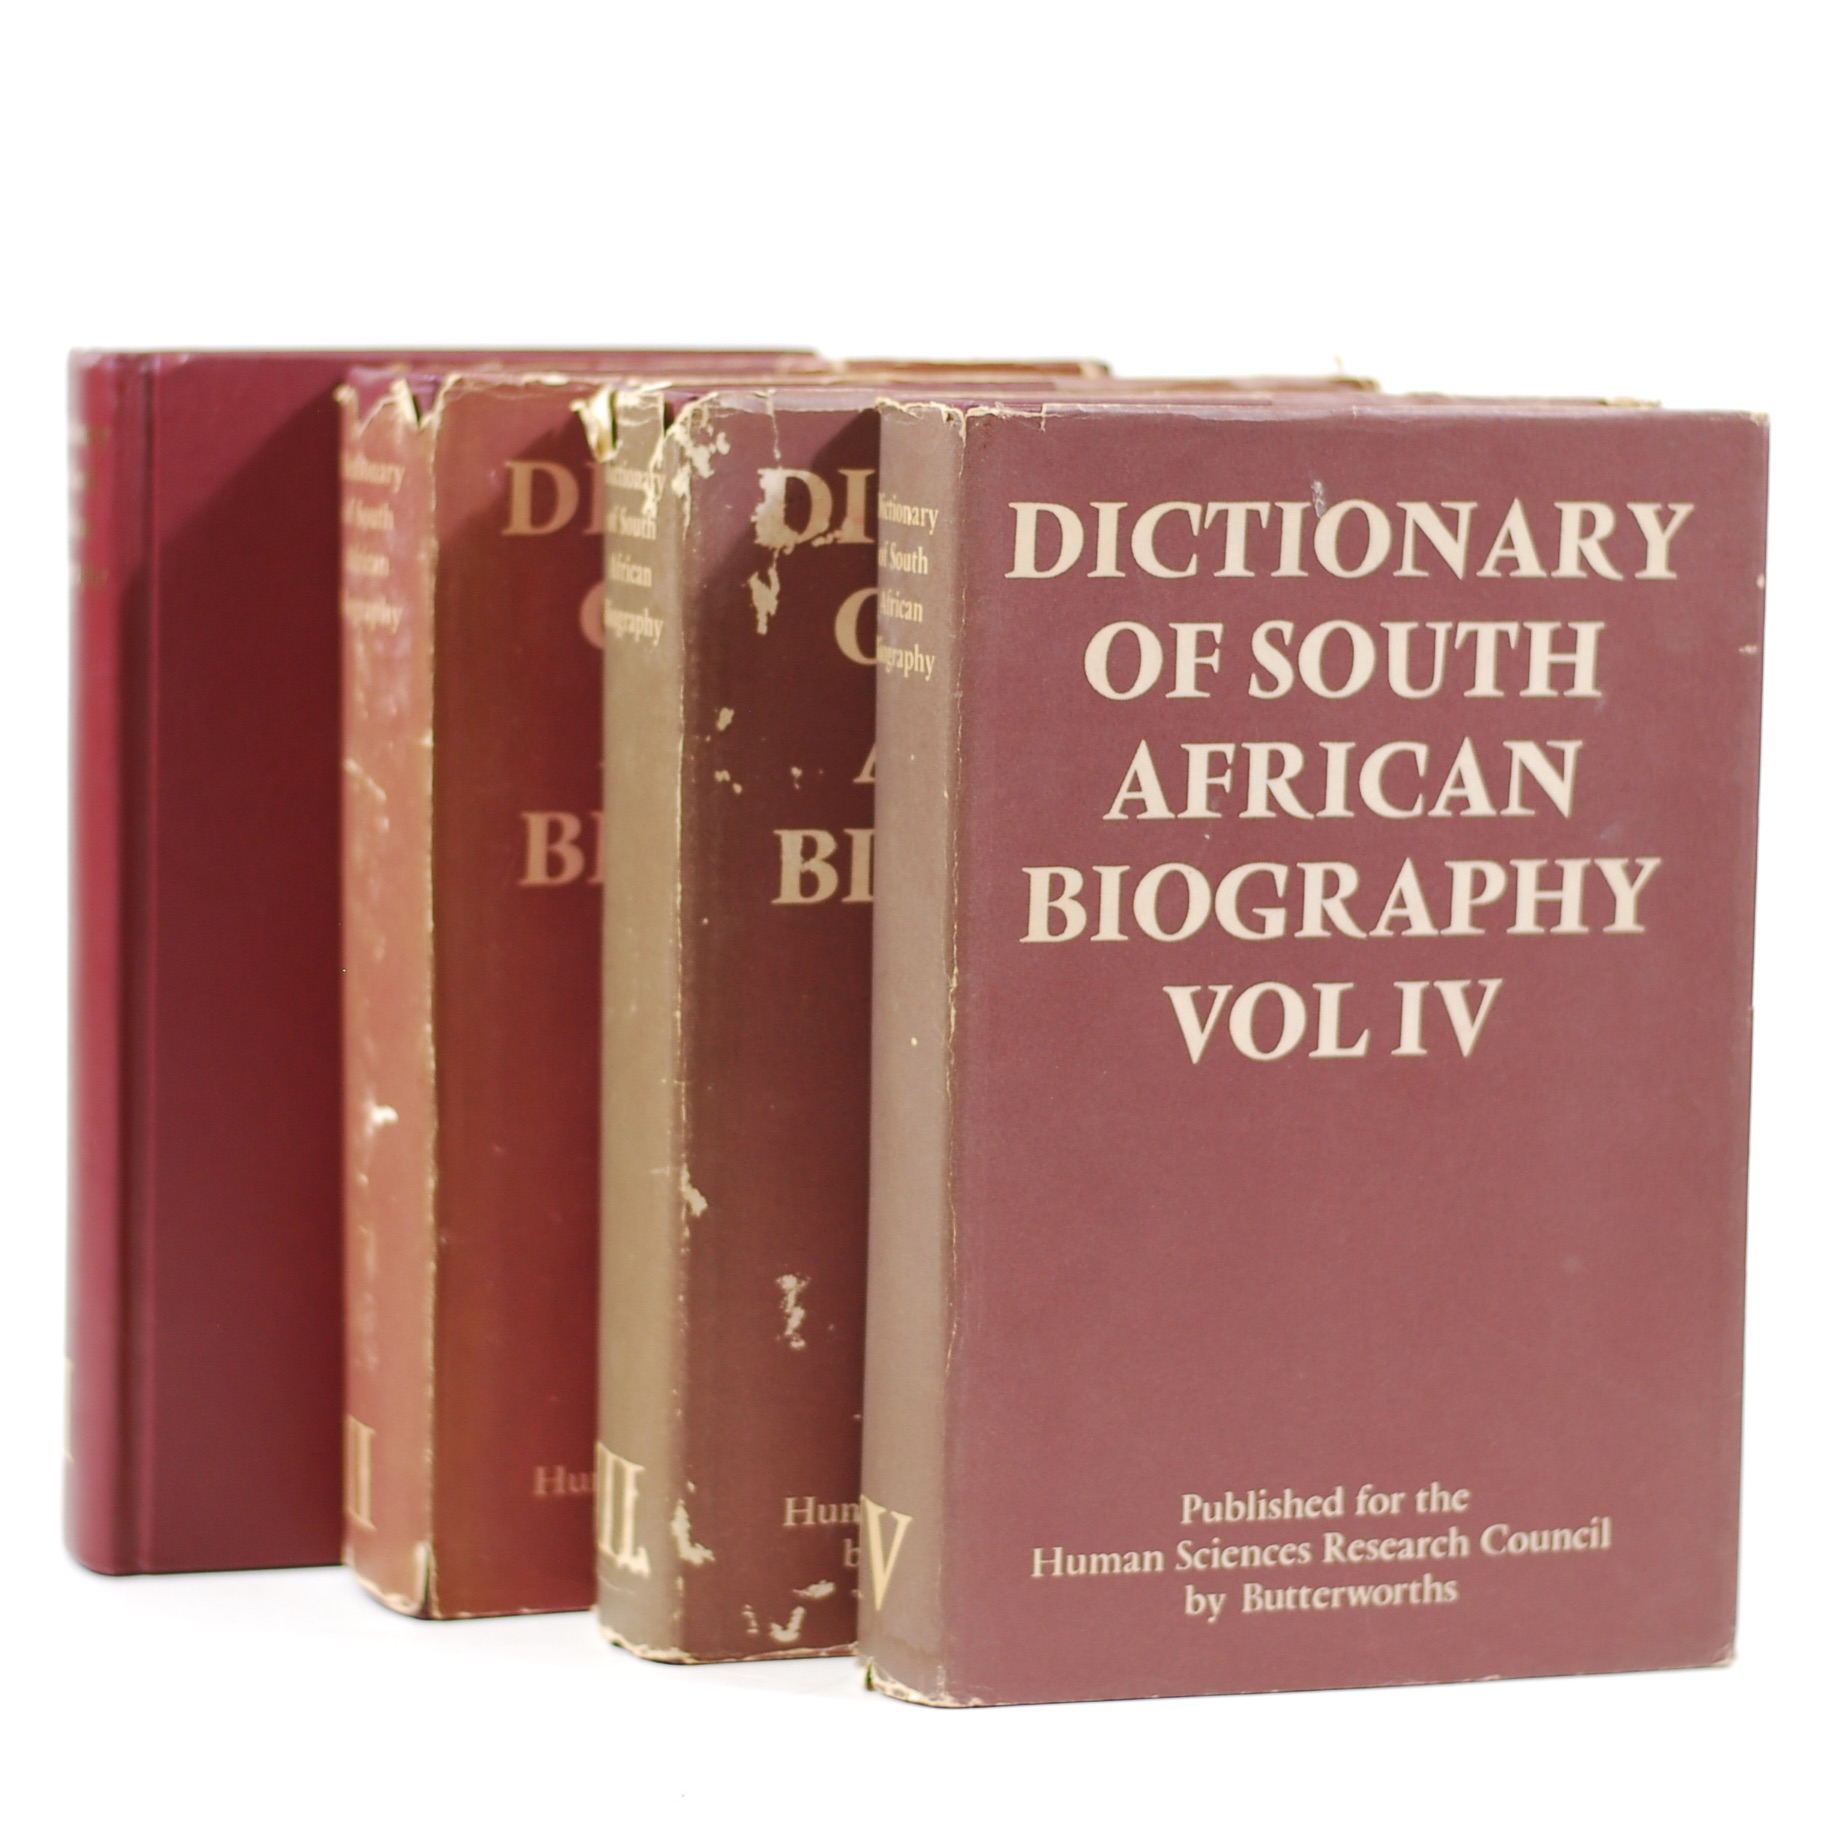 Dictionary of South African Biography. 4 Volumes - de Kock, W J (Ed)